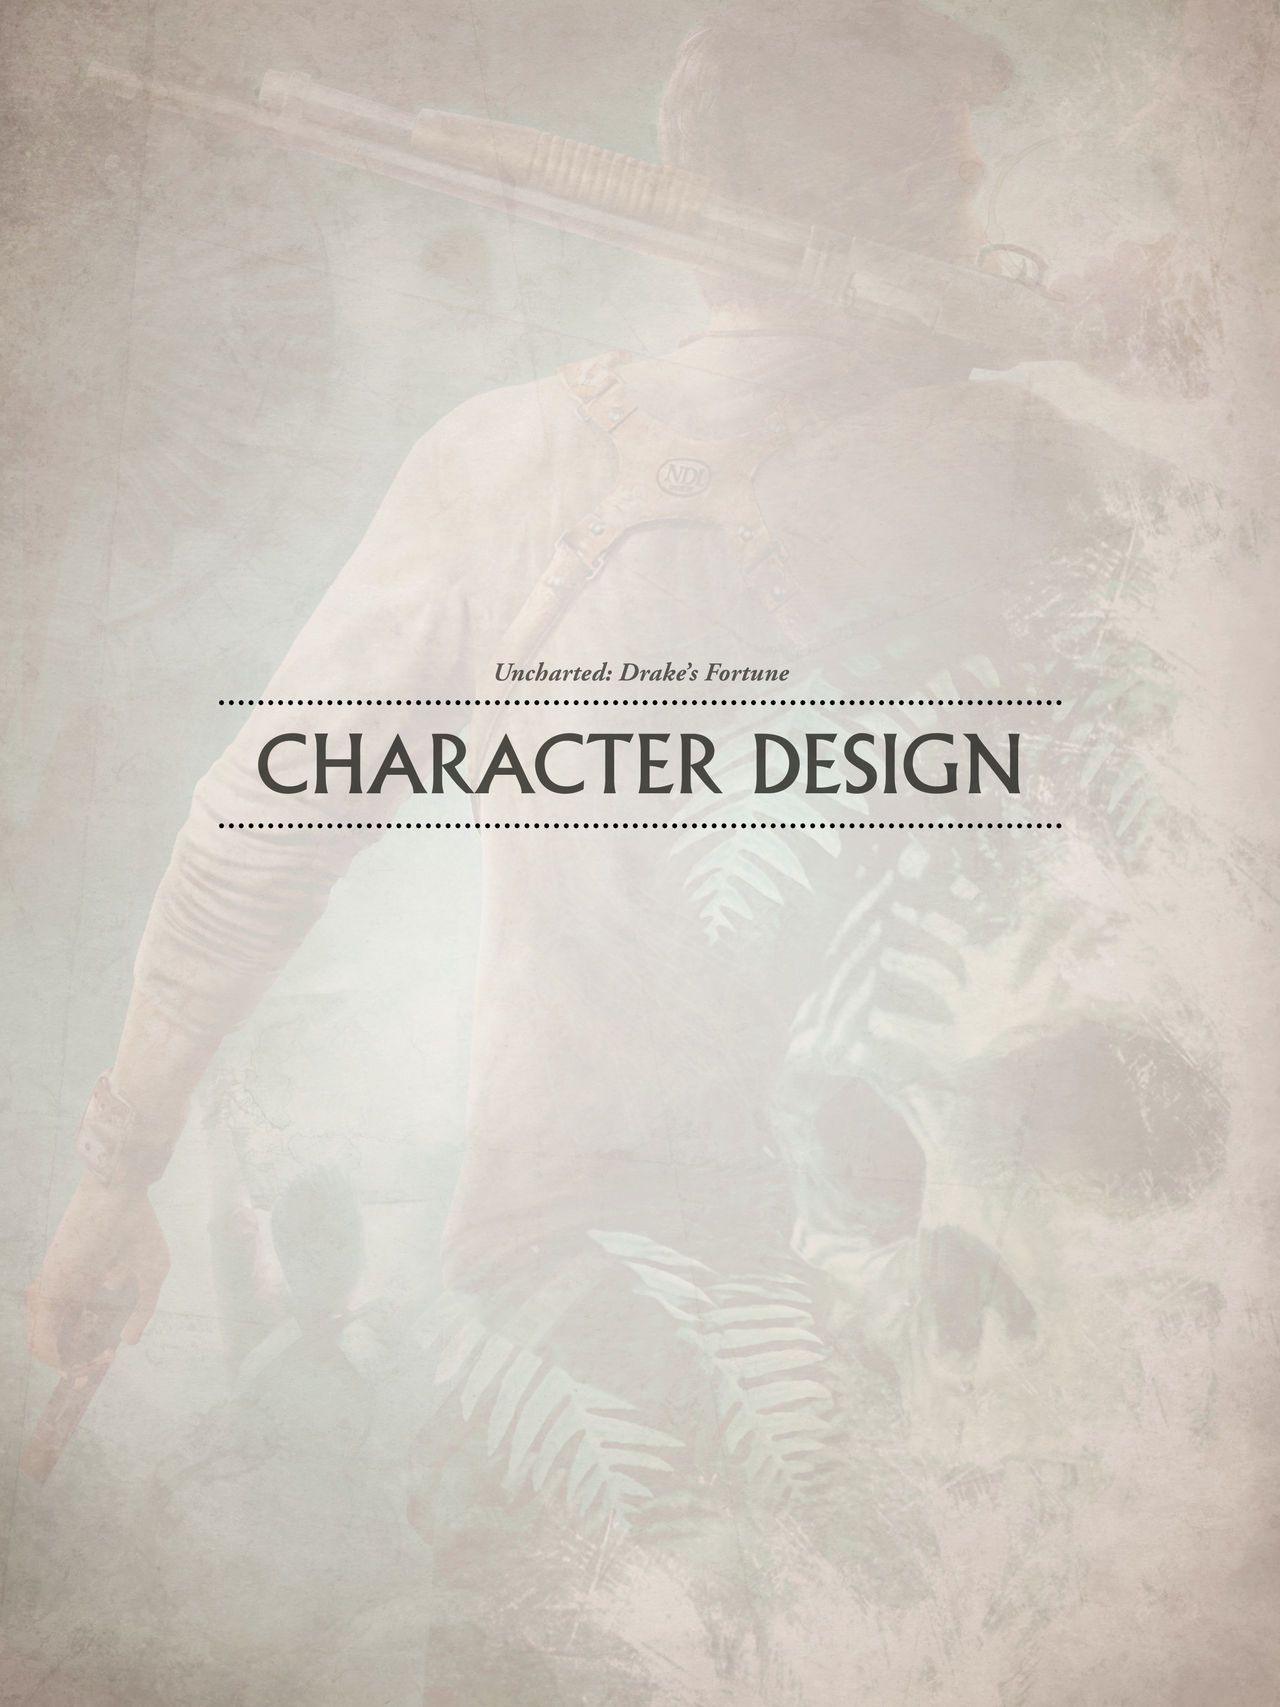 The Art of the Uncharted Trilogy 10